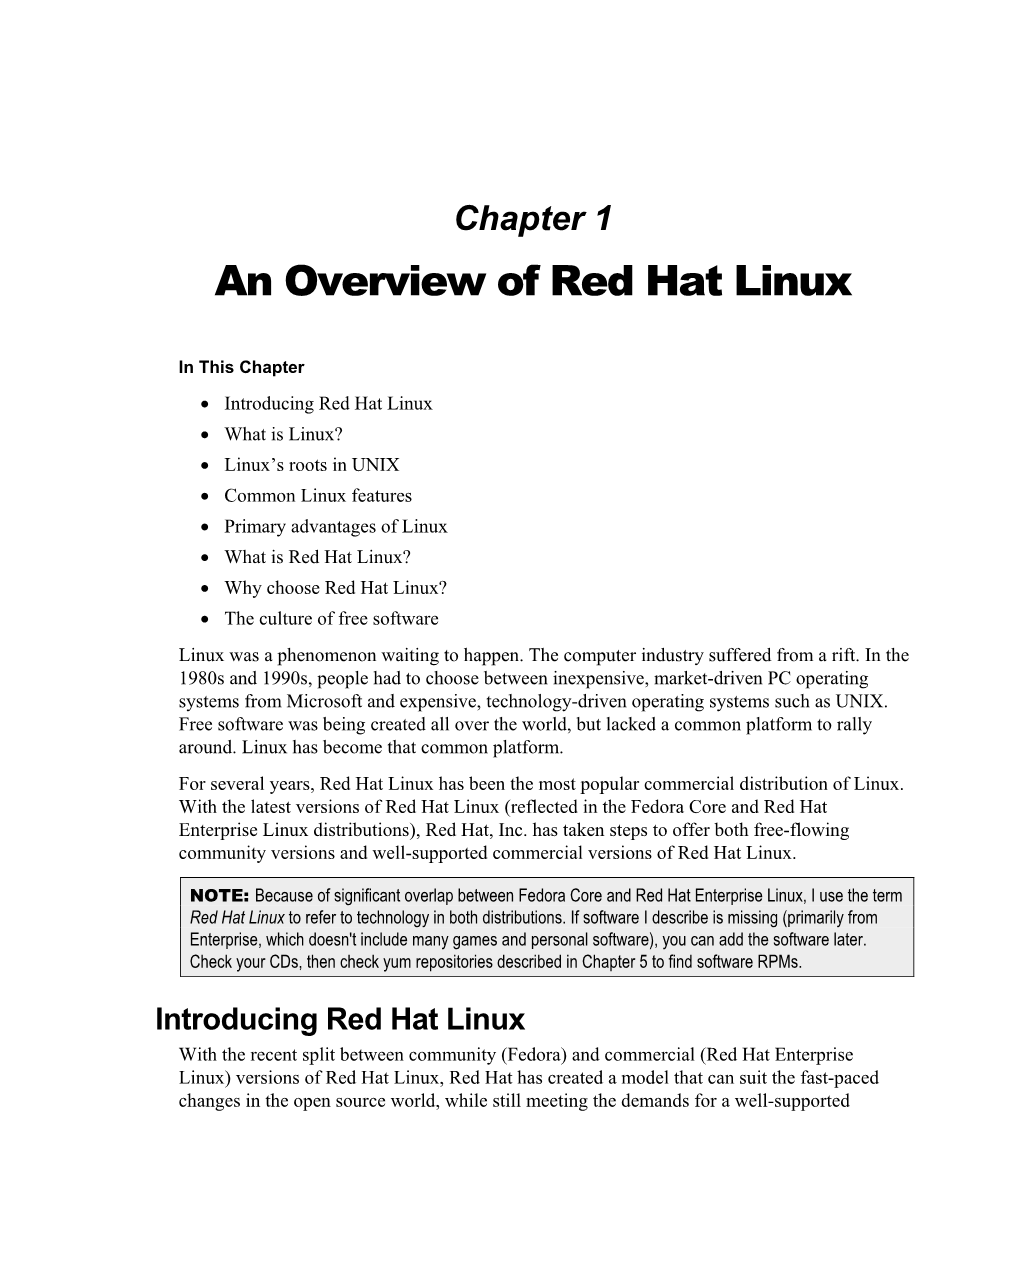 An Overview of Red Hat Linux